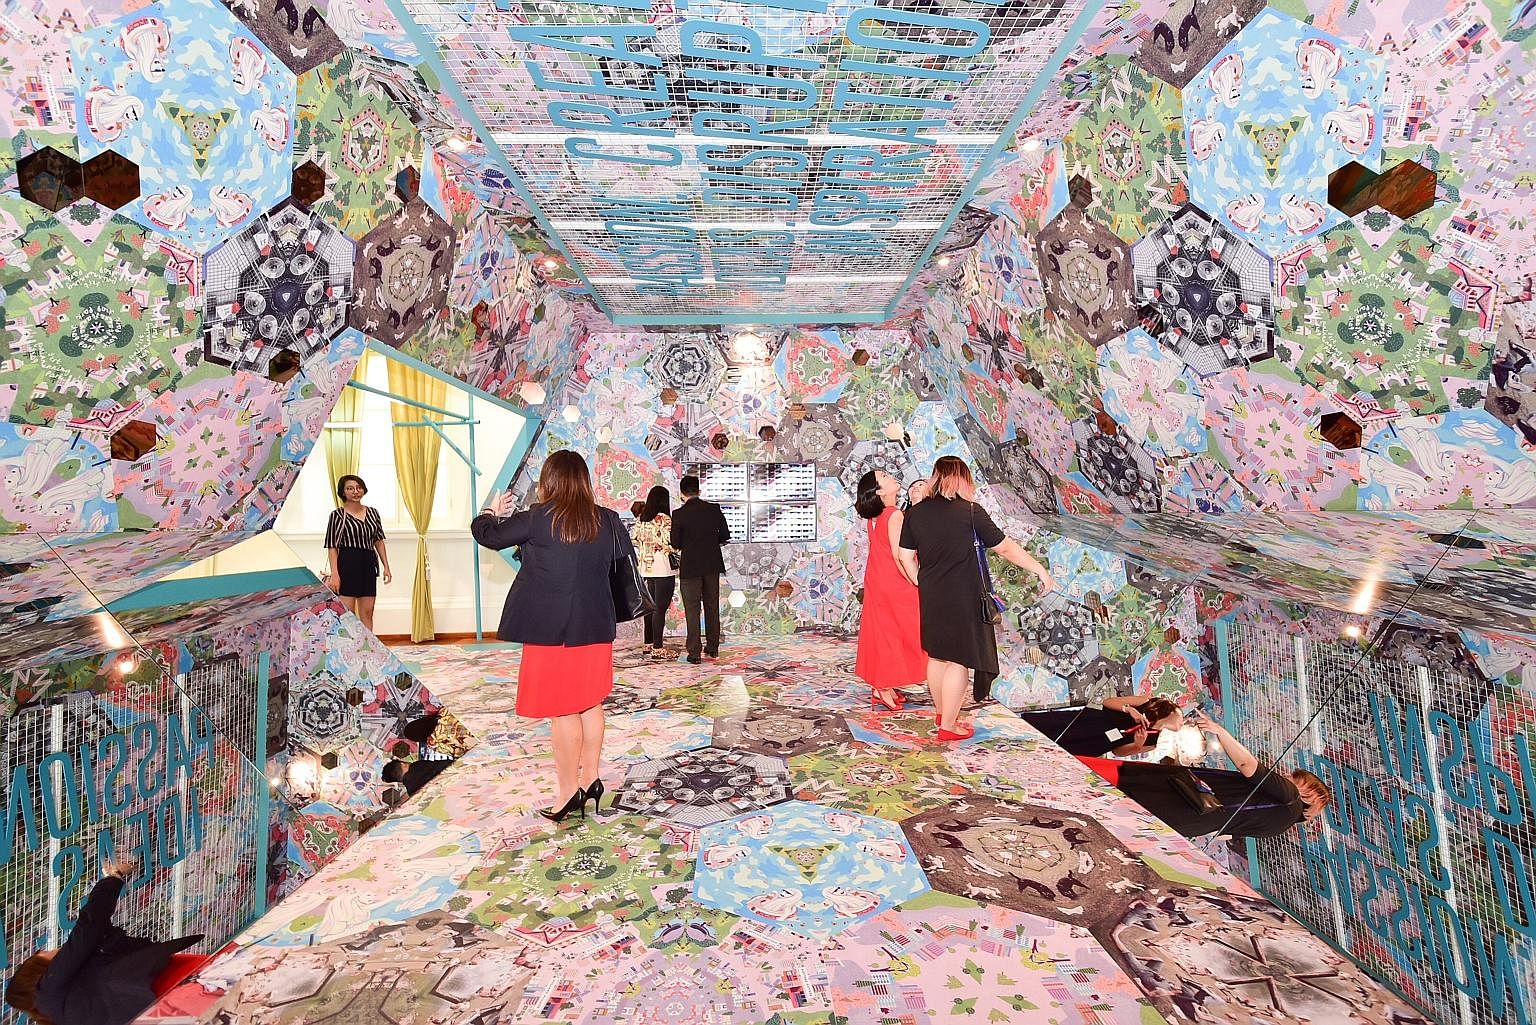 Visitors were given a chance to experience the Kaleidoscope Tunnel, an installation by Singapore-based artists Esther Goh, Eugene Soh and Fong Qi Wei, at the launch of the Singapore Tourism Board's (STB) new marketing campaign at the Arts House yeste